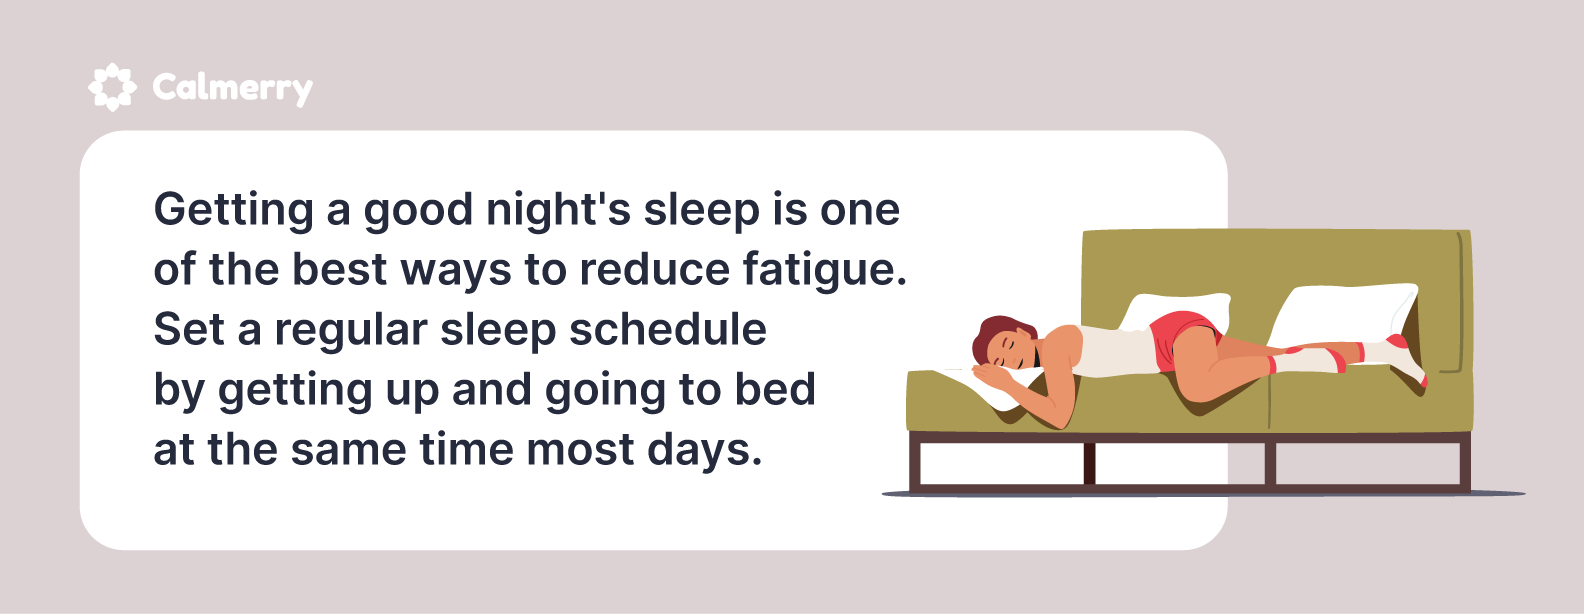 Getting a good night's sleep is one of the best ways to reduce fatigue